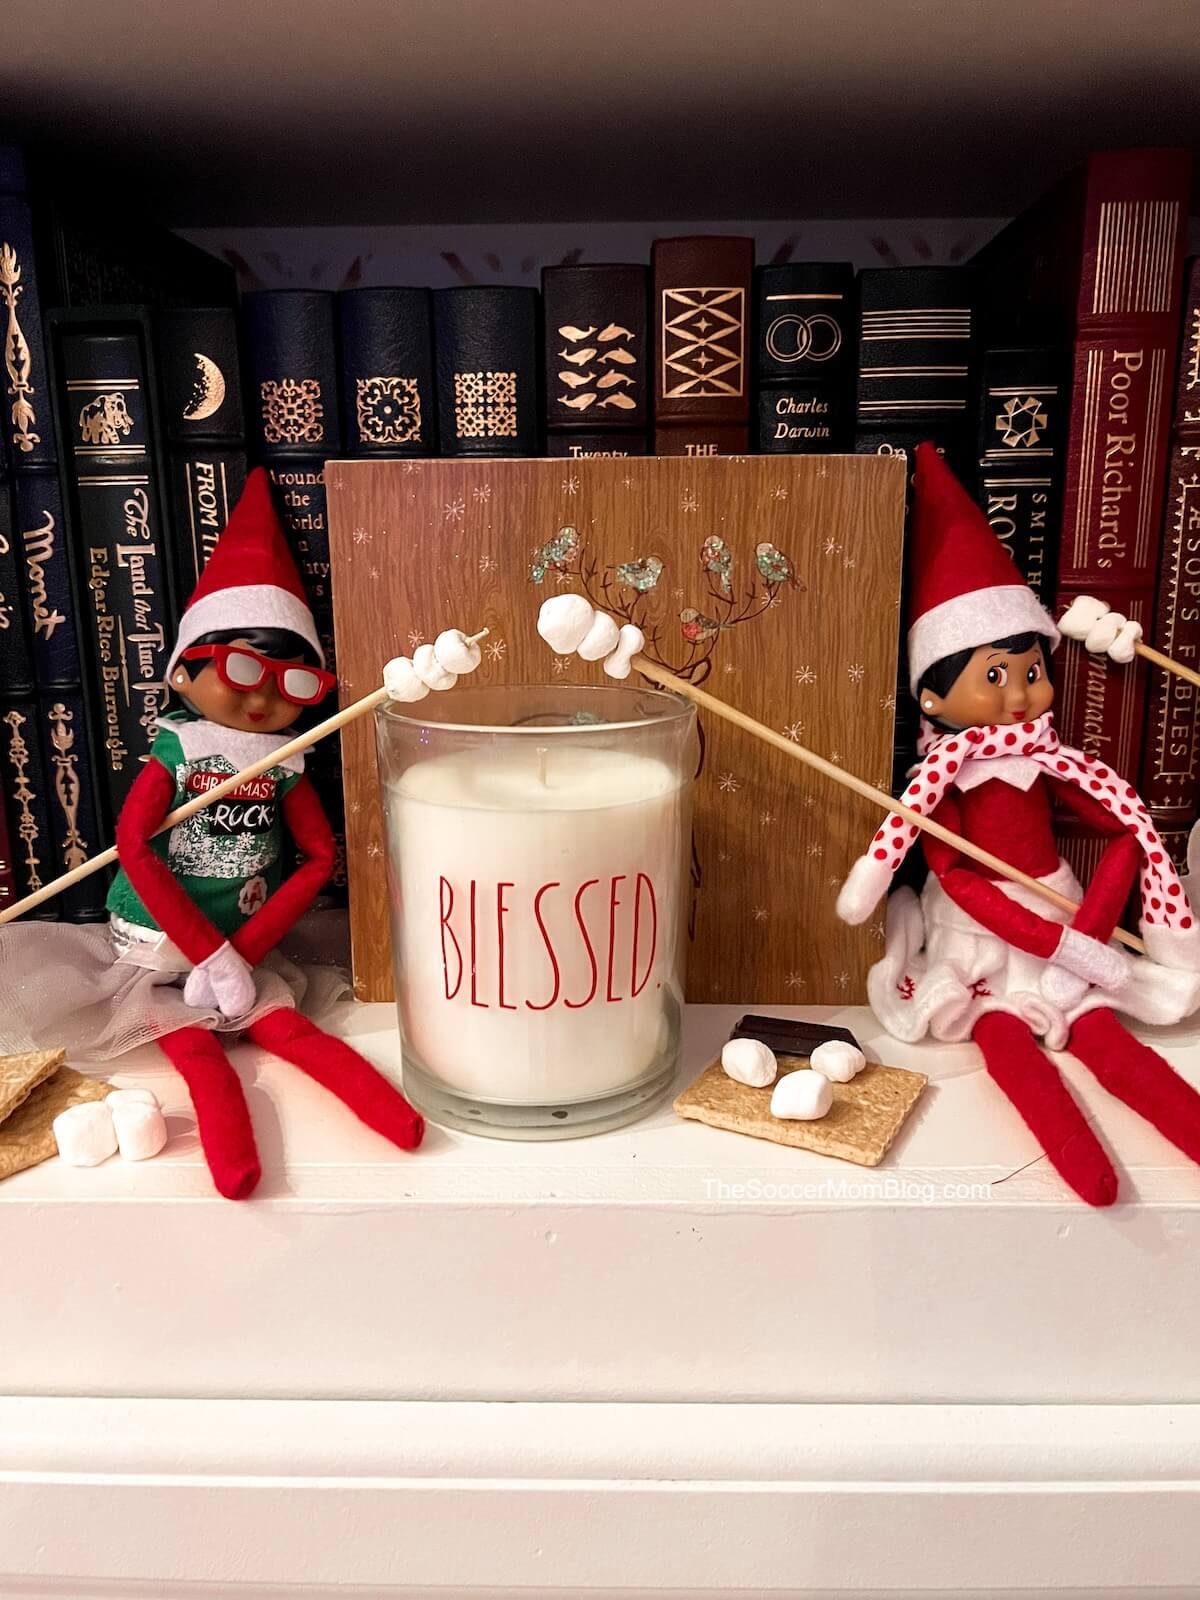 two Elf on the Shelf dolls pretending to roast marshmallows over a candle.